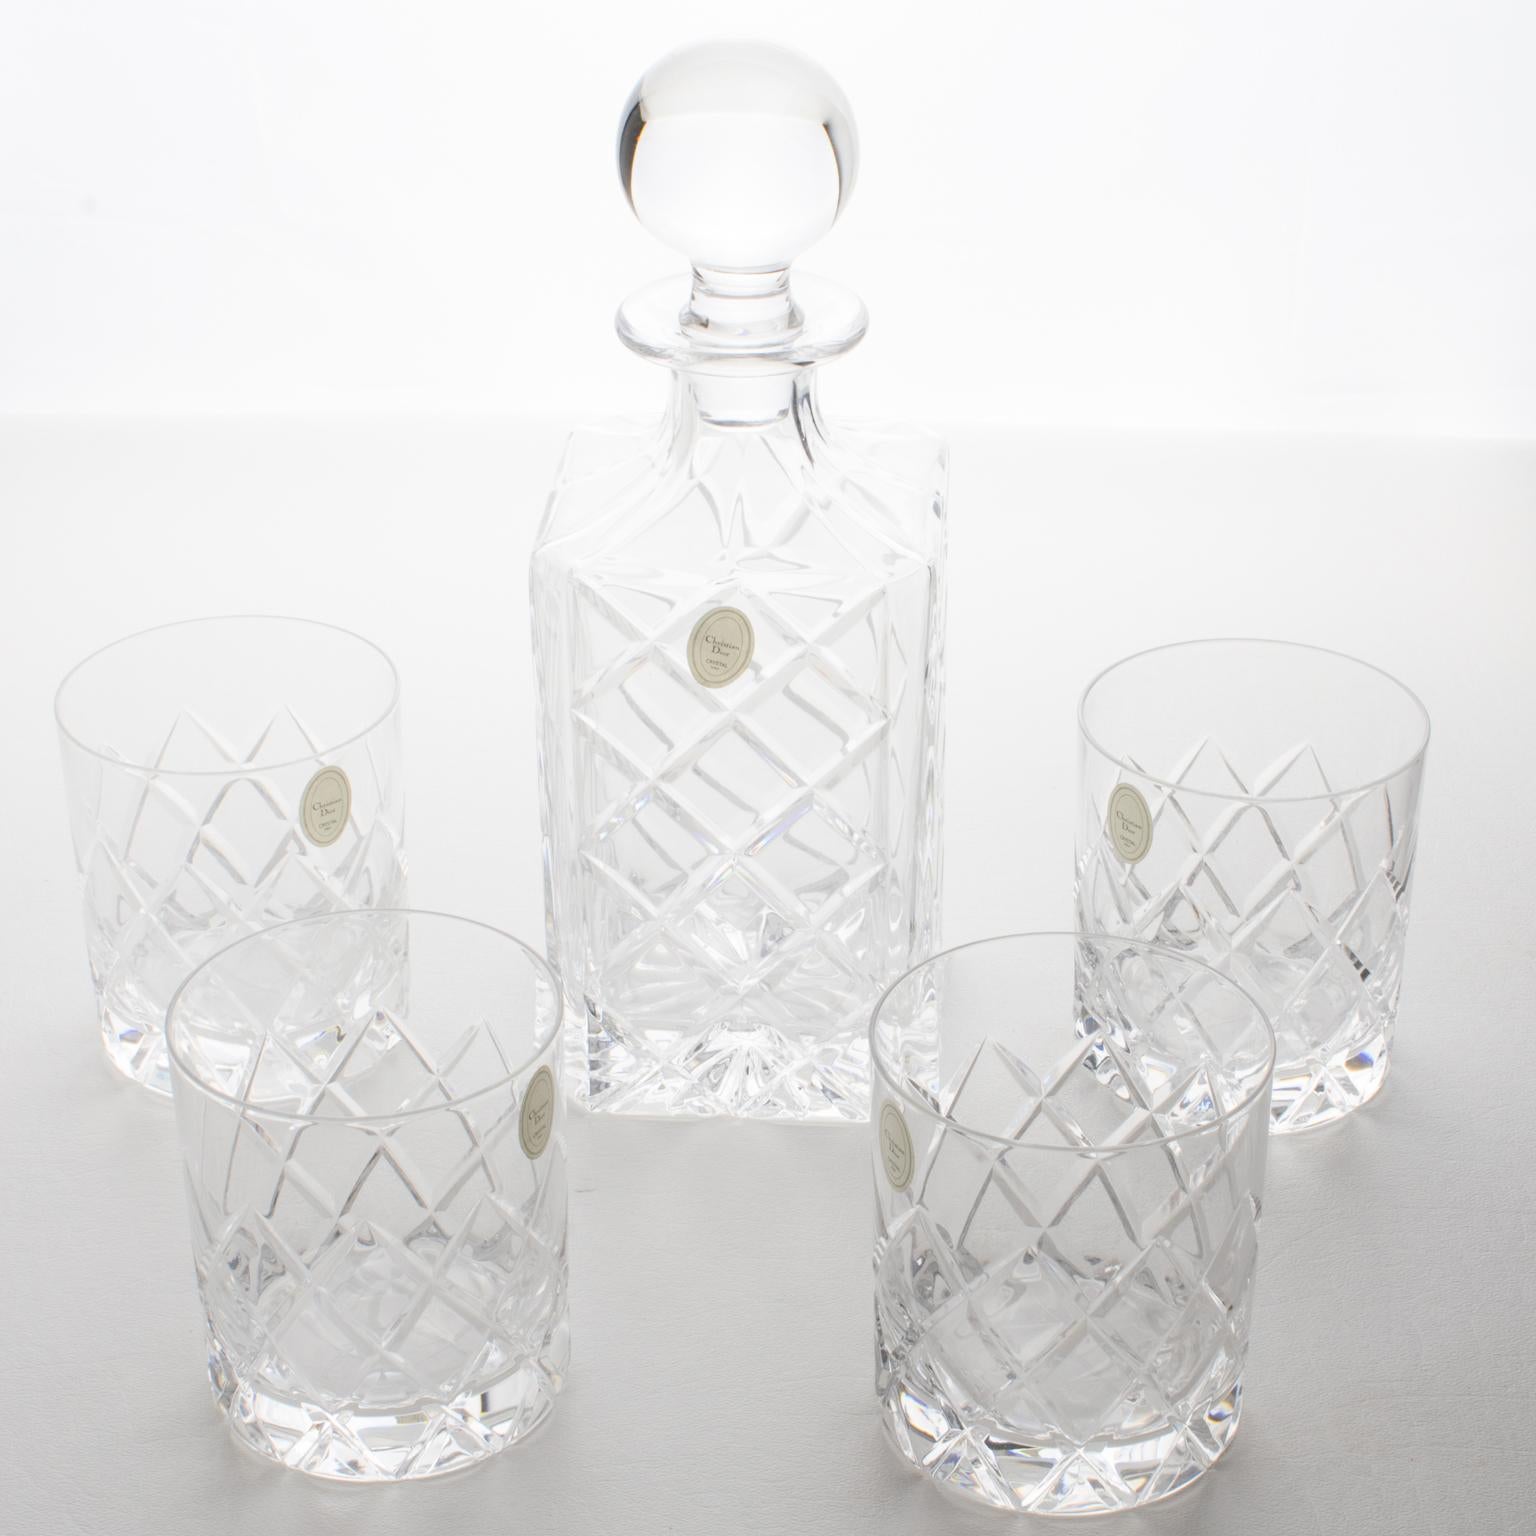 Christian Dior Crystal Decanter and Glasses Set, 5 pieces in Original Box, 1980s 9